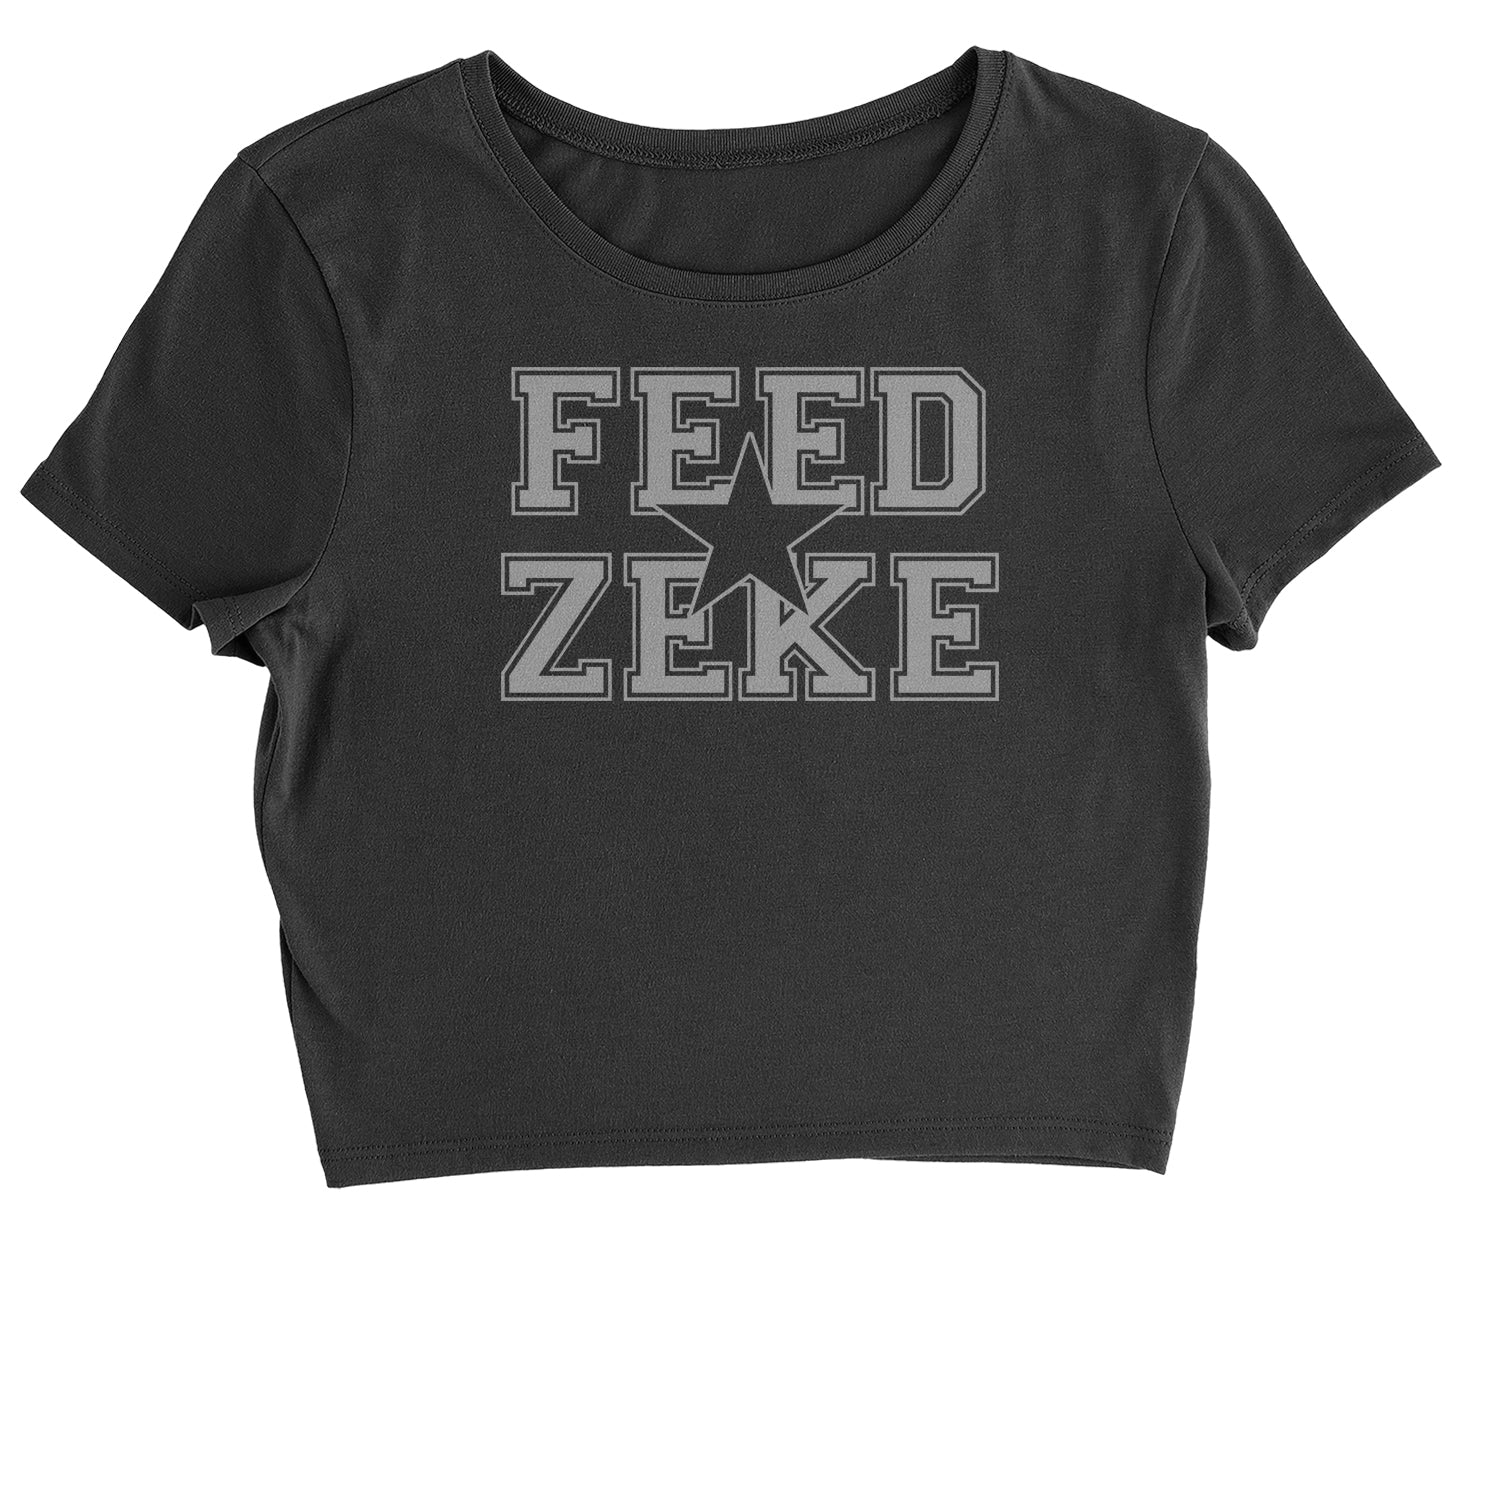 Feed Zeke Cropped T-Shirt #expressiontees by Expression Tees